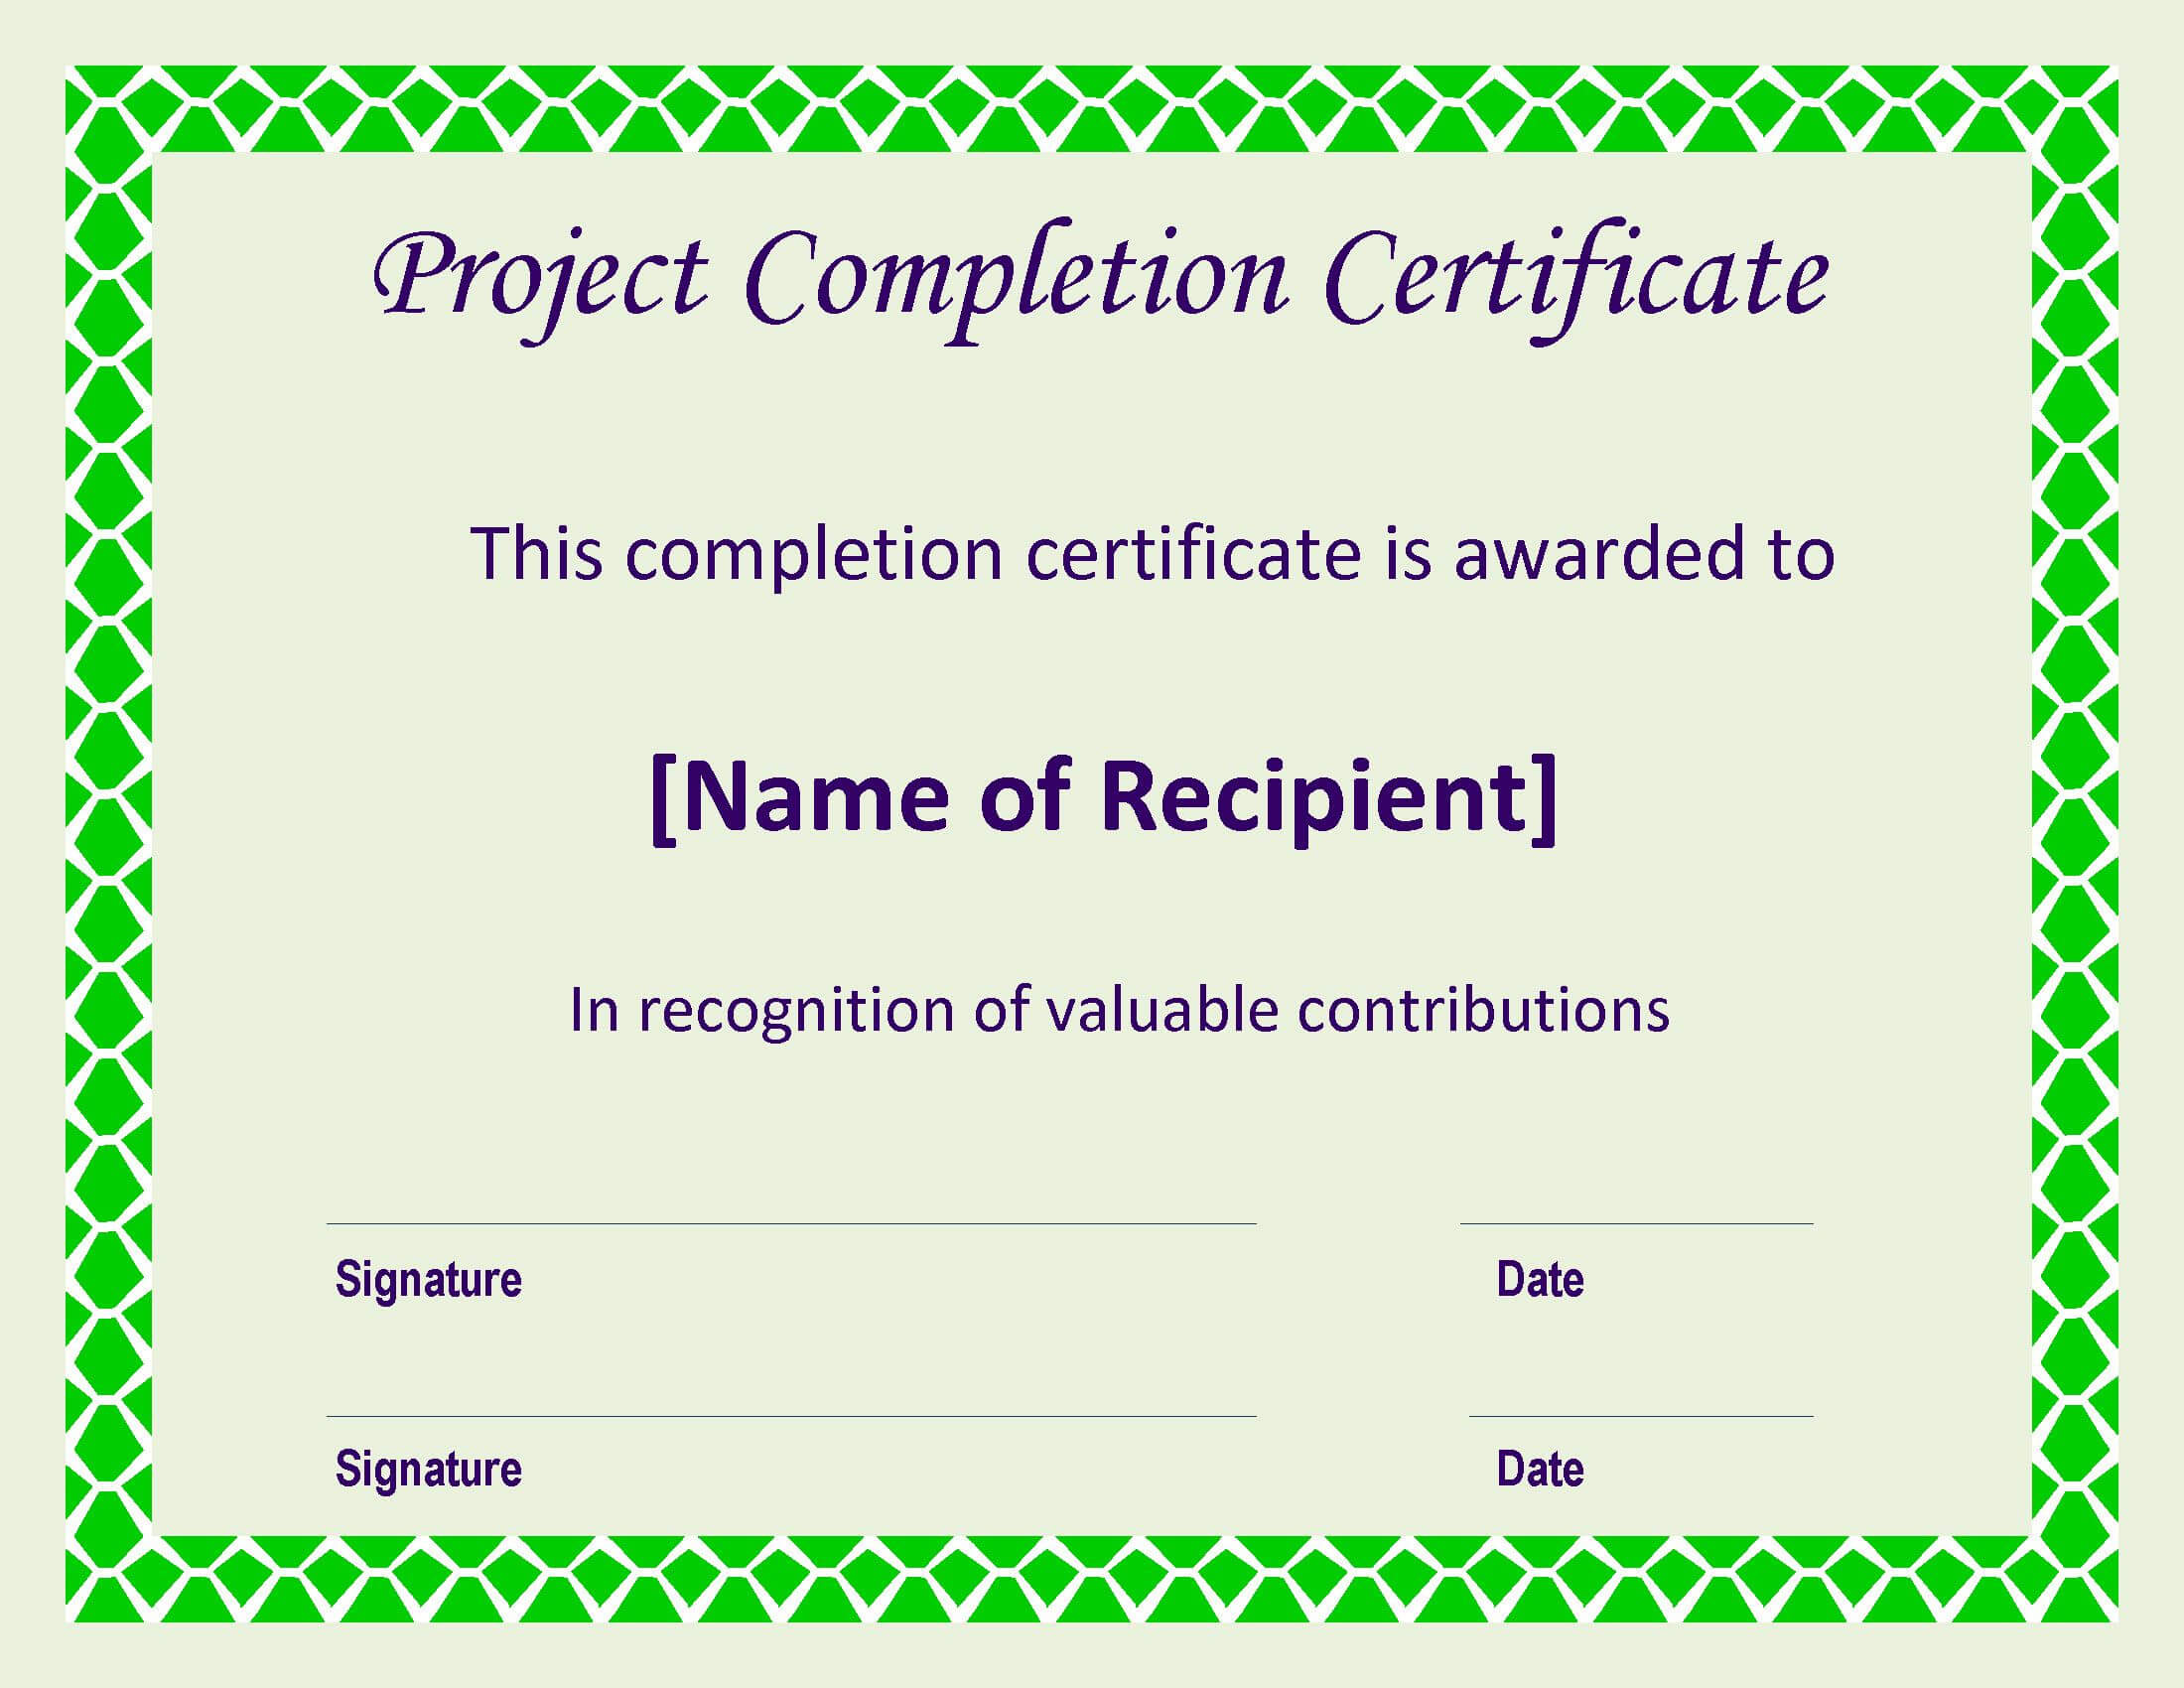 Certificate Of Completion Project | Templates At Within Certificate Of Completion Template Construction